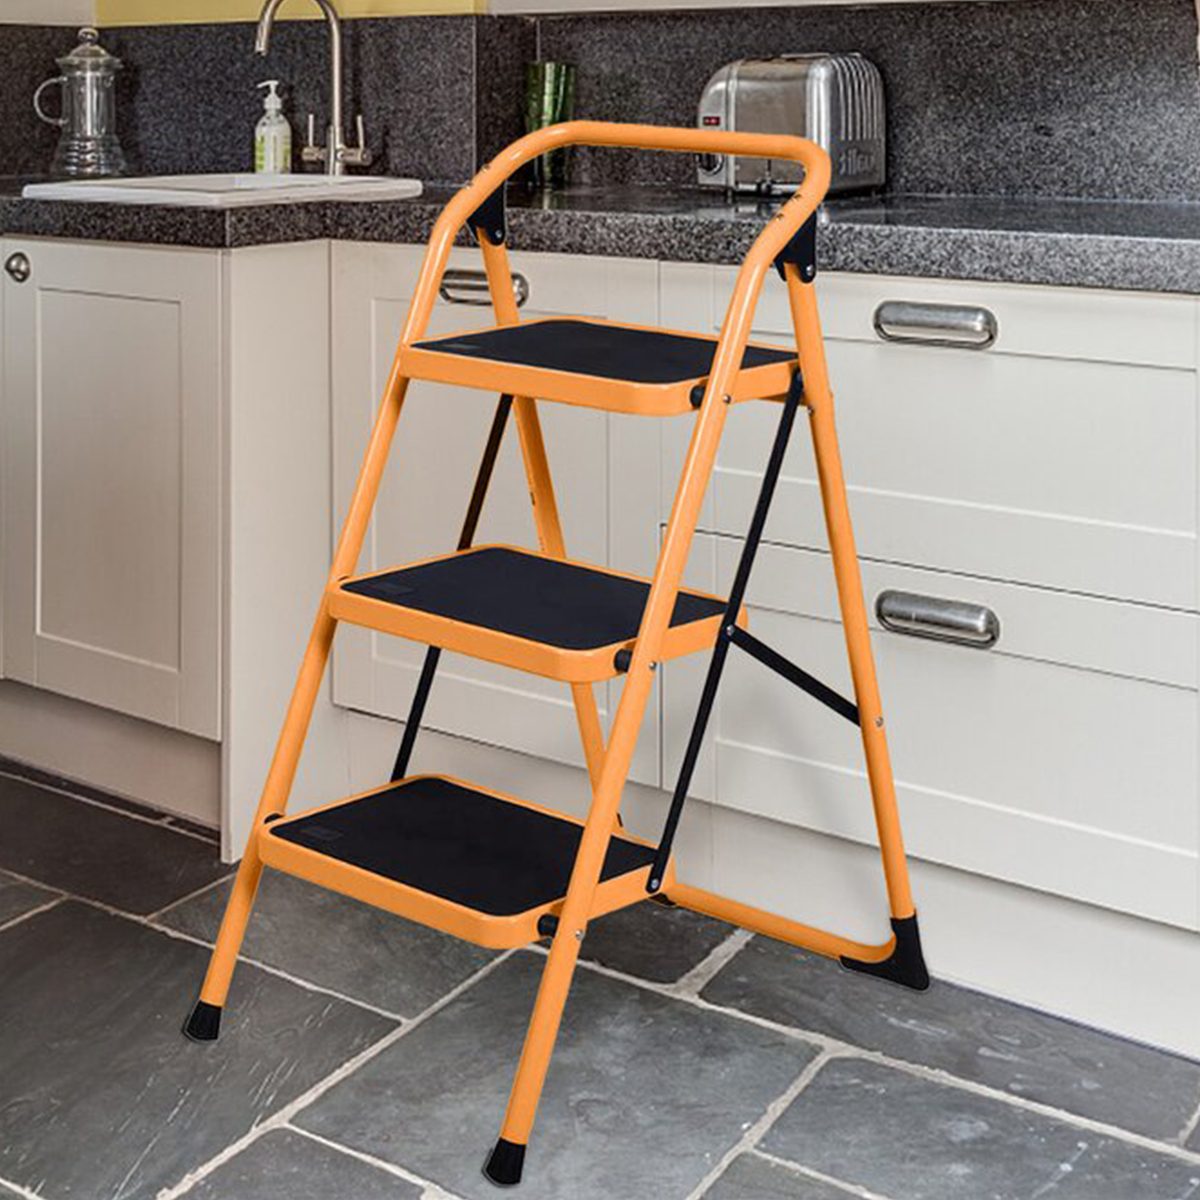 The 10 Best Budget-Friendly Ladder Deals for DIYing